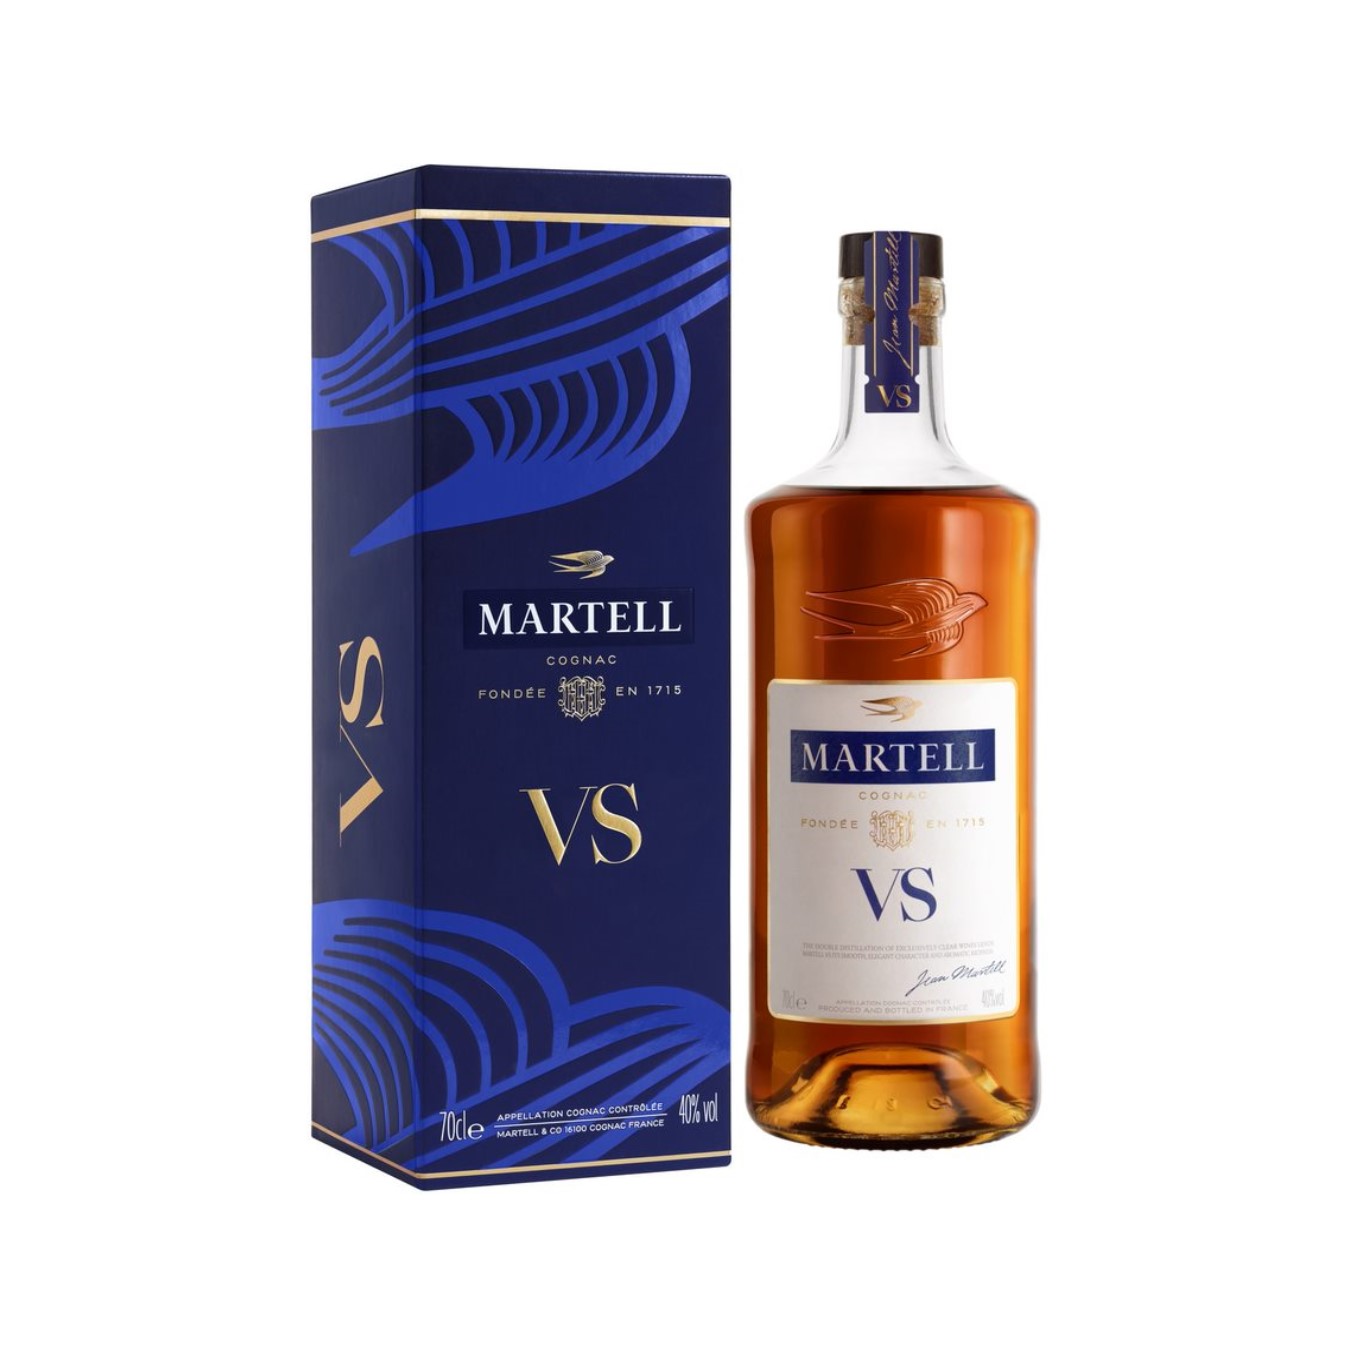 Cognac Martell V.S. 40% in a box of 0.7 l